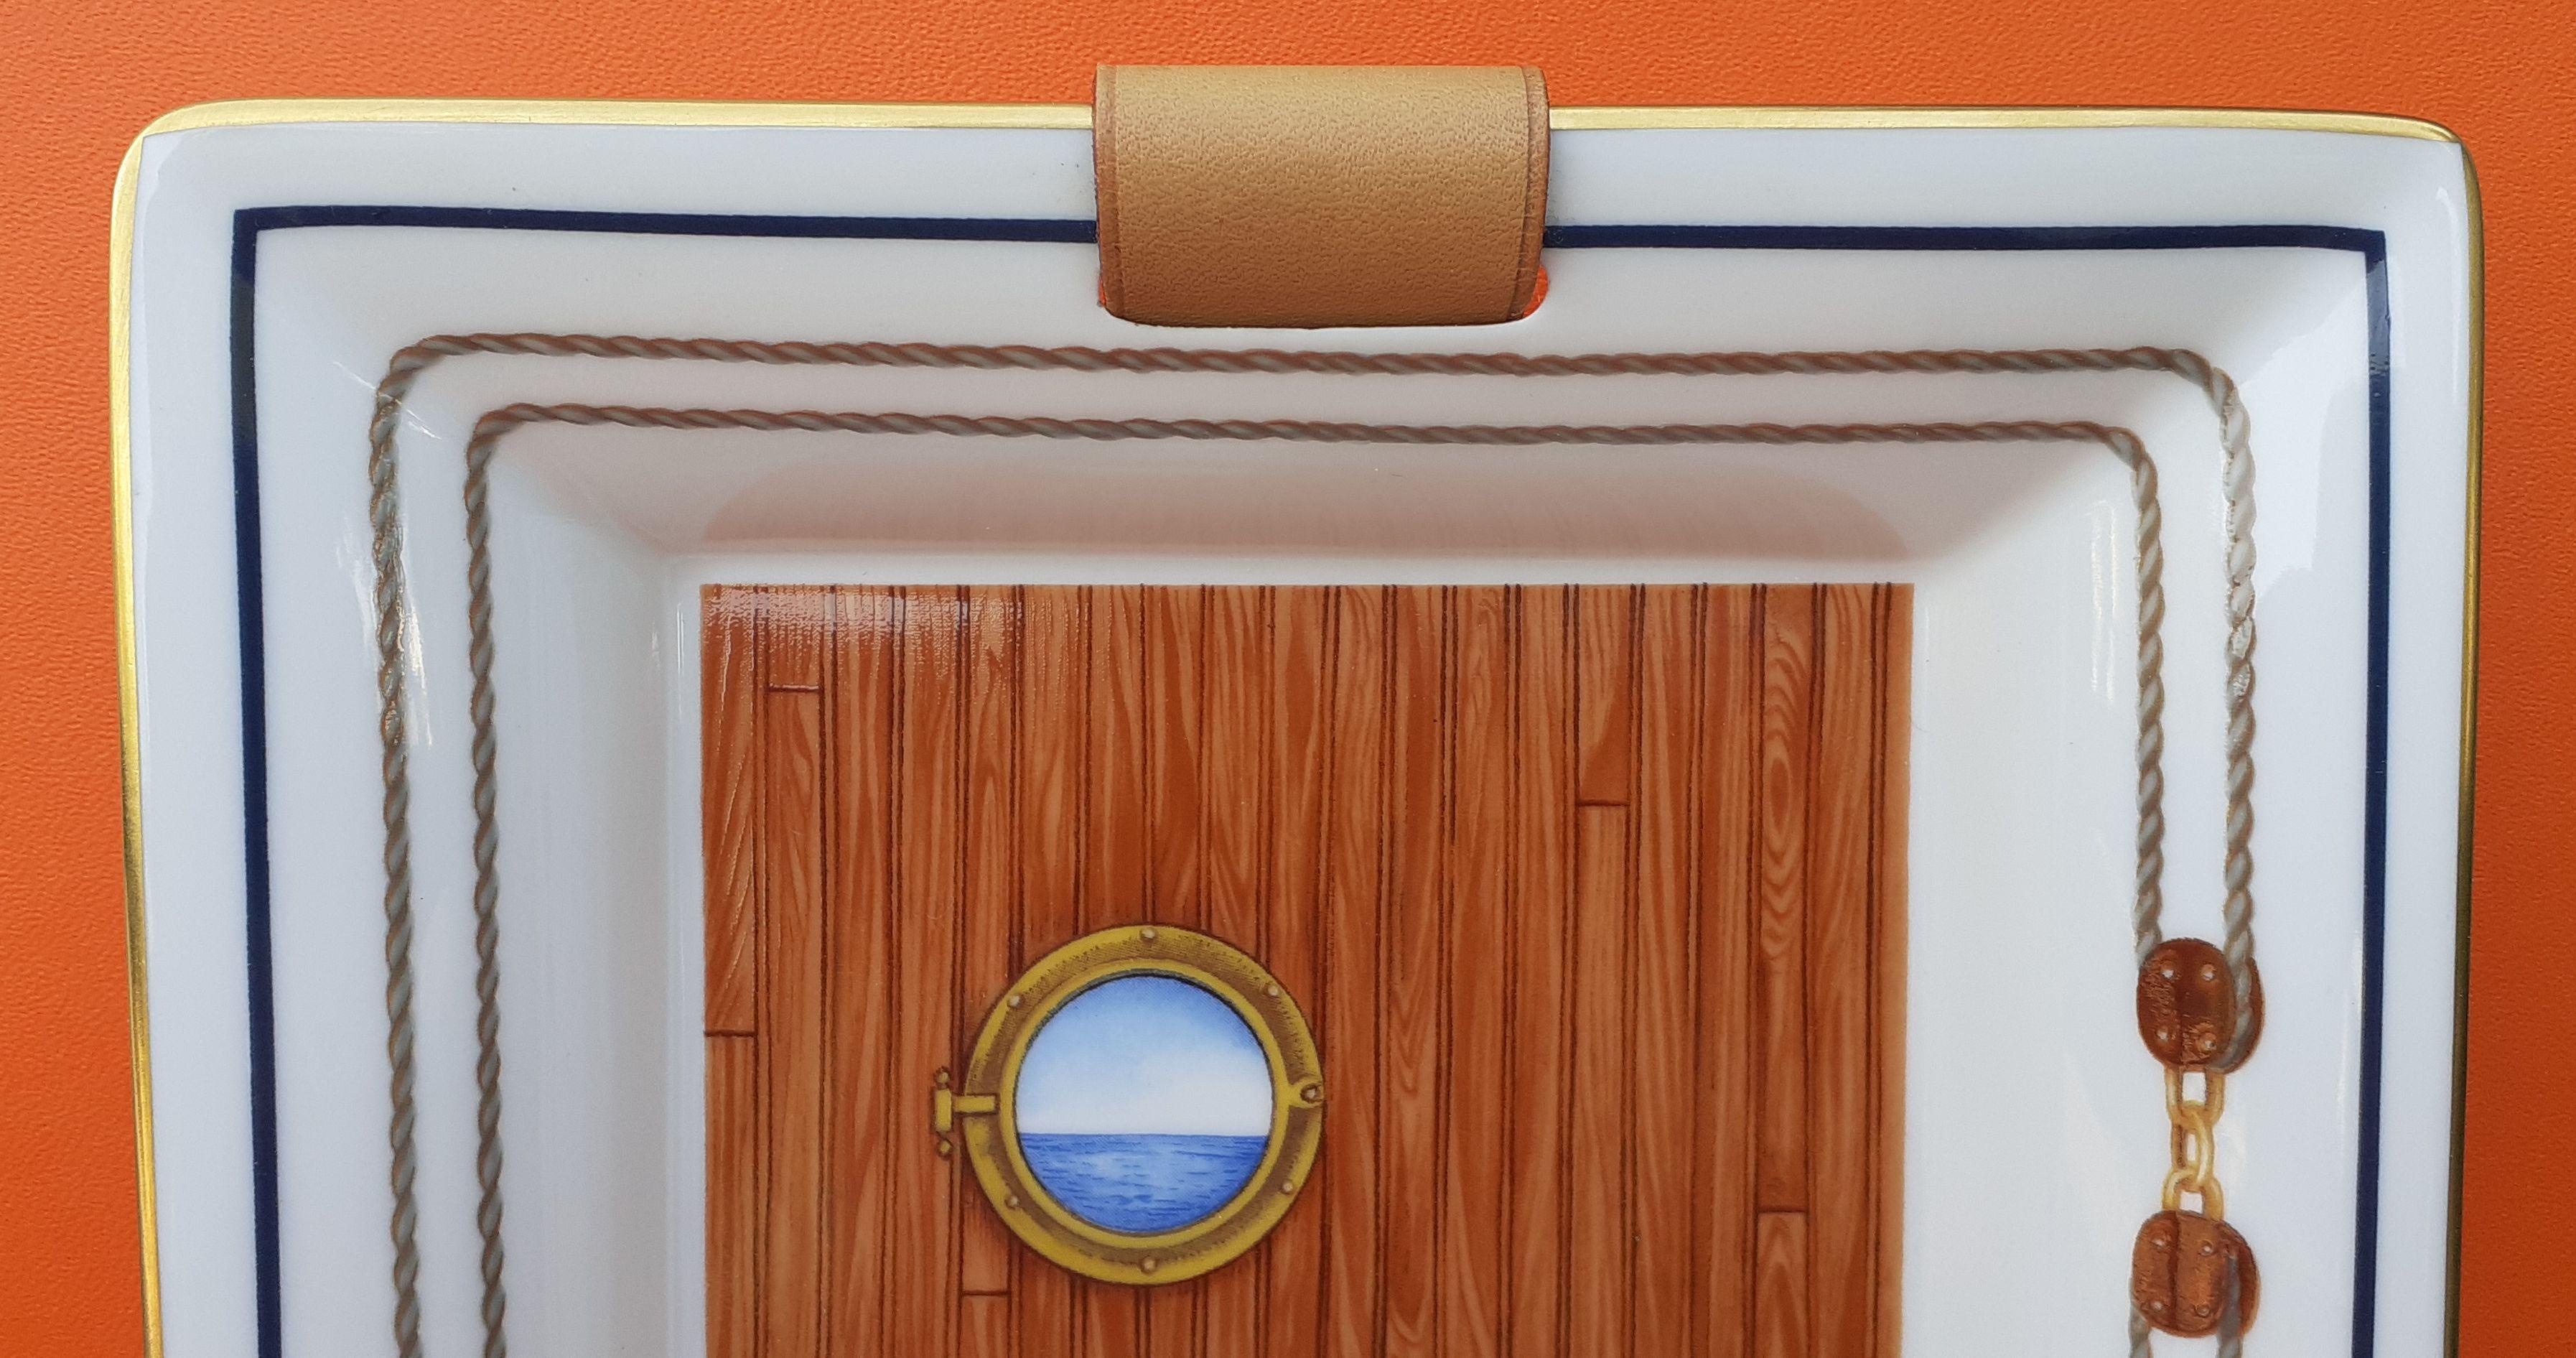 Beautiful Authentic Hermès Change Tray

Pattern: porthole, lifebuoy and pulleys

Made in France 

Probably Vintage

Made of printed Porcelain and Leather

Colorways: White, Light Brown, Blue

The drawing is covered with varnish, which gives it a